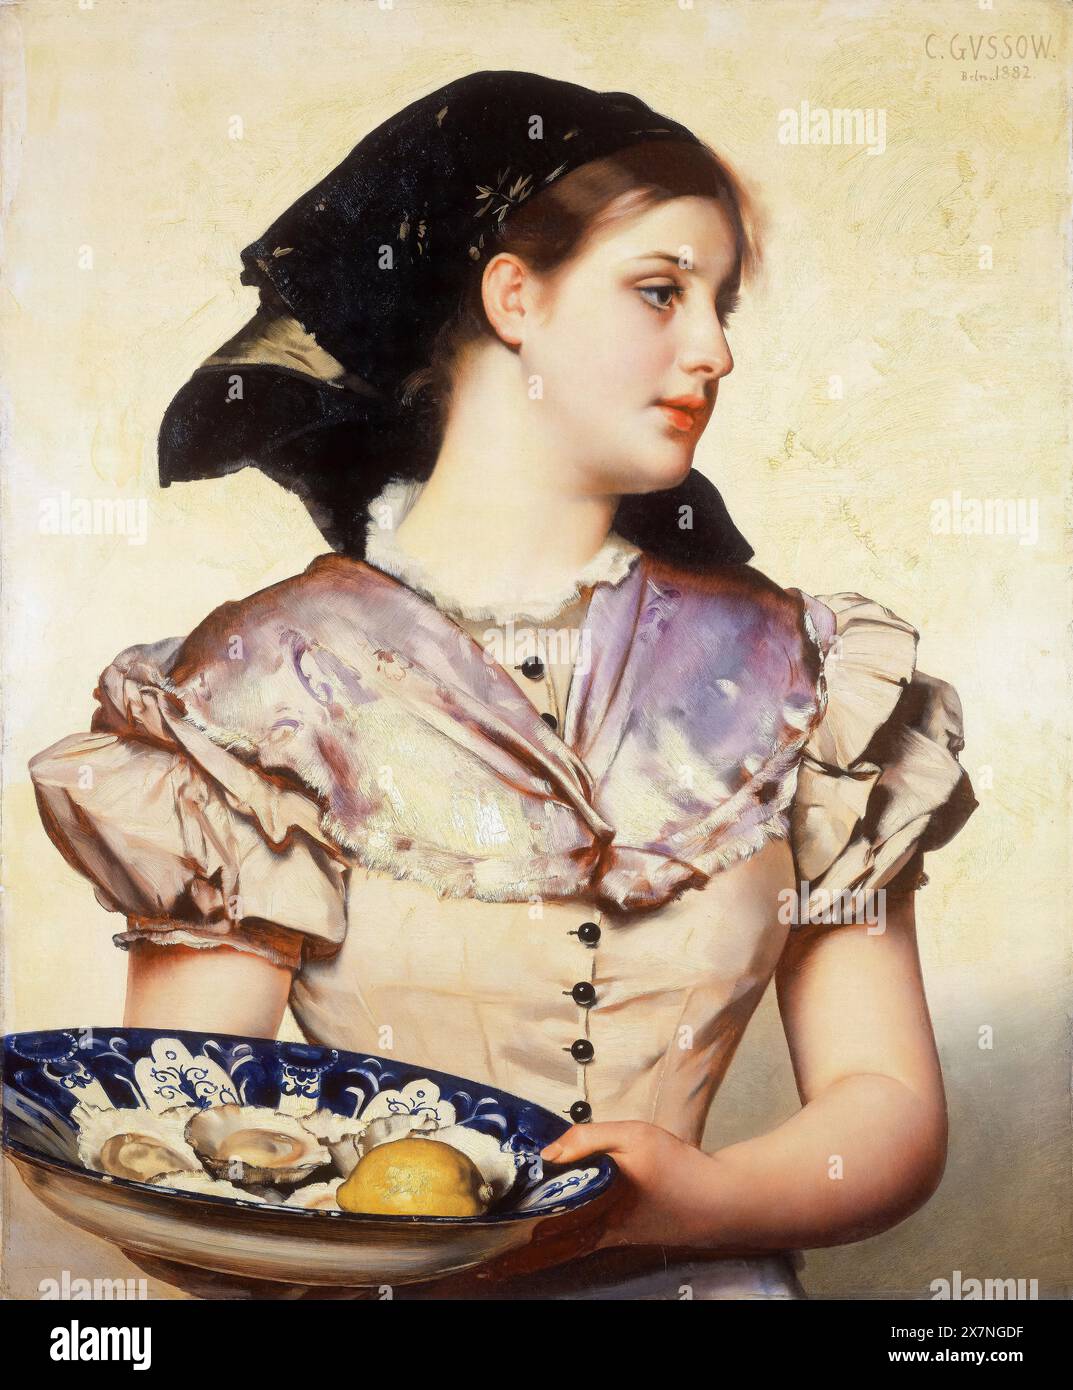 Karl Gussow, The Oyster Girl, portrait painting in oil on panel, 1882 Stock Photo